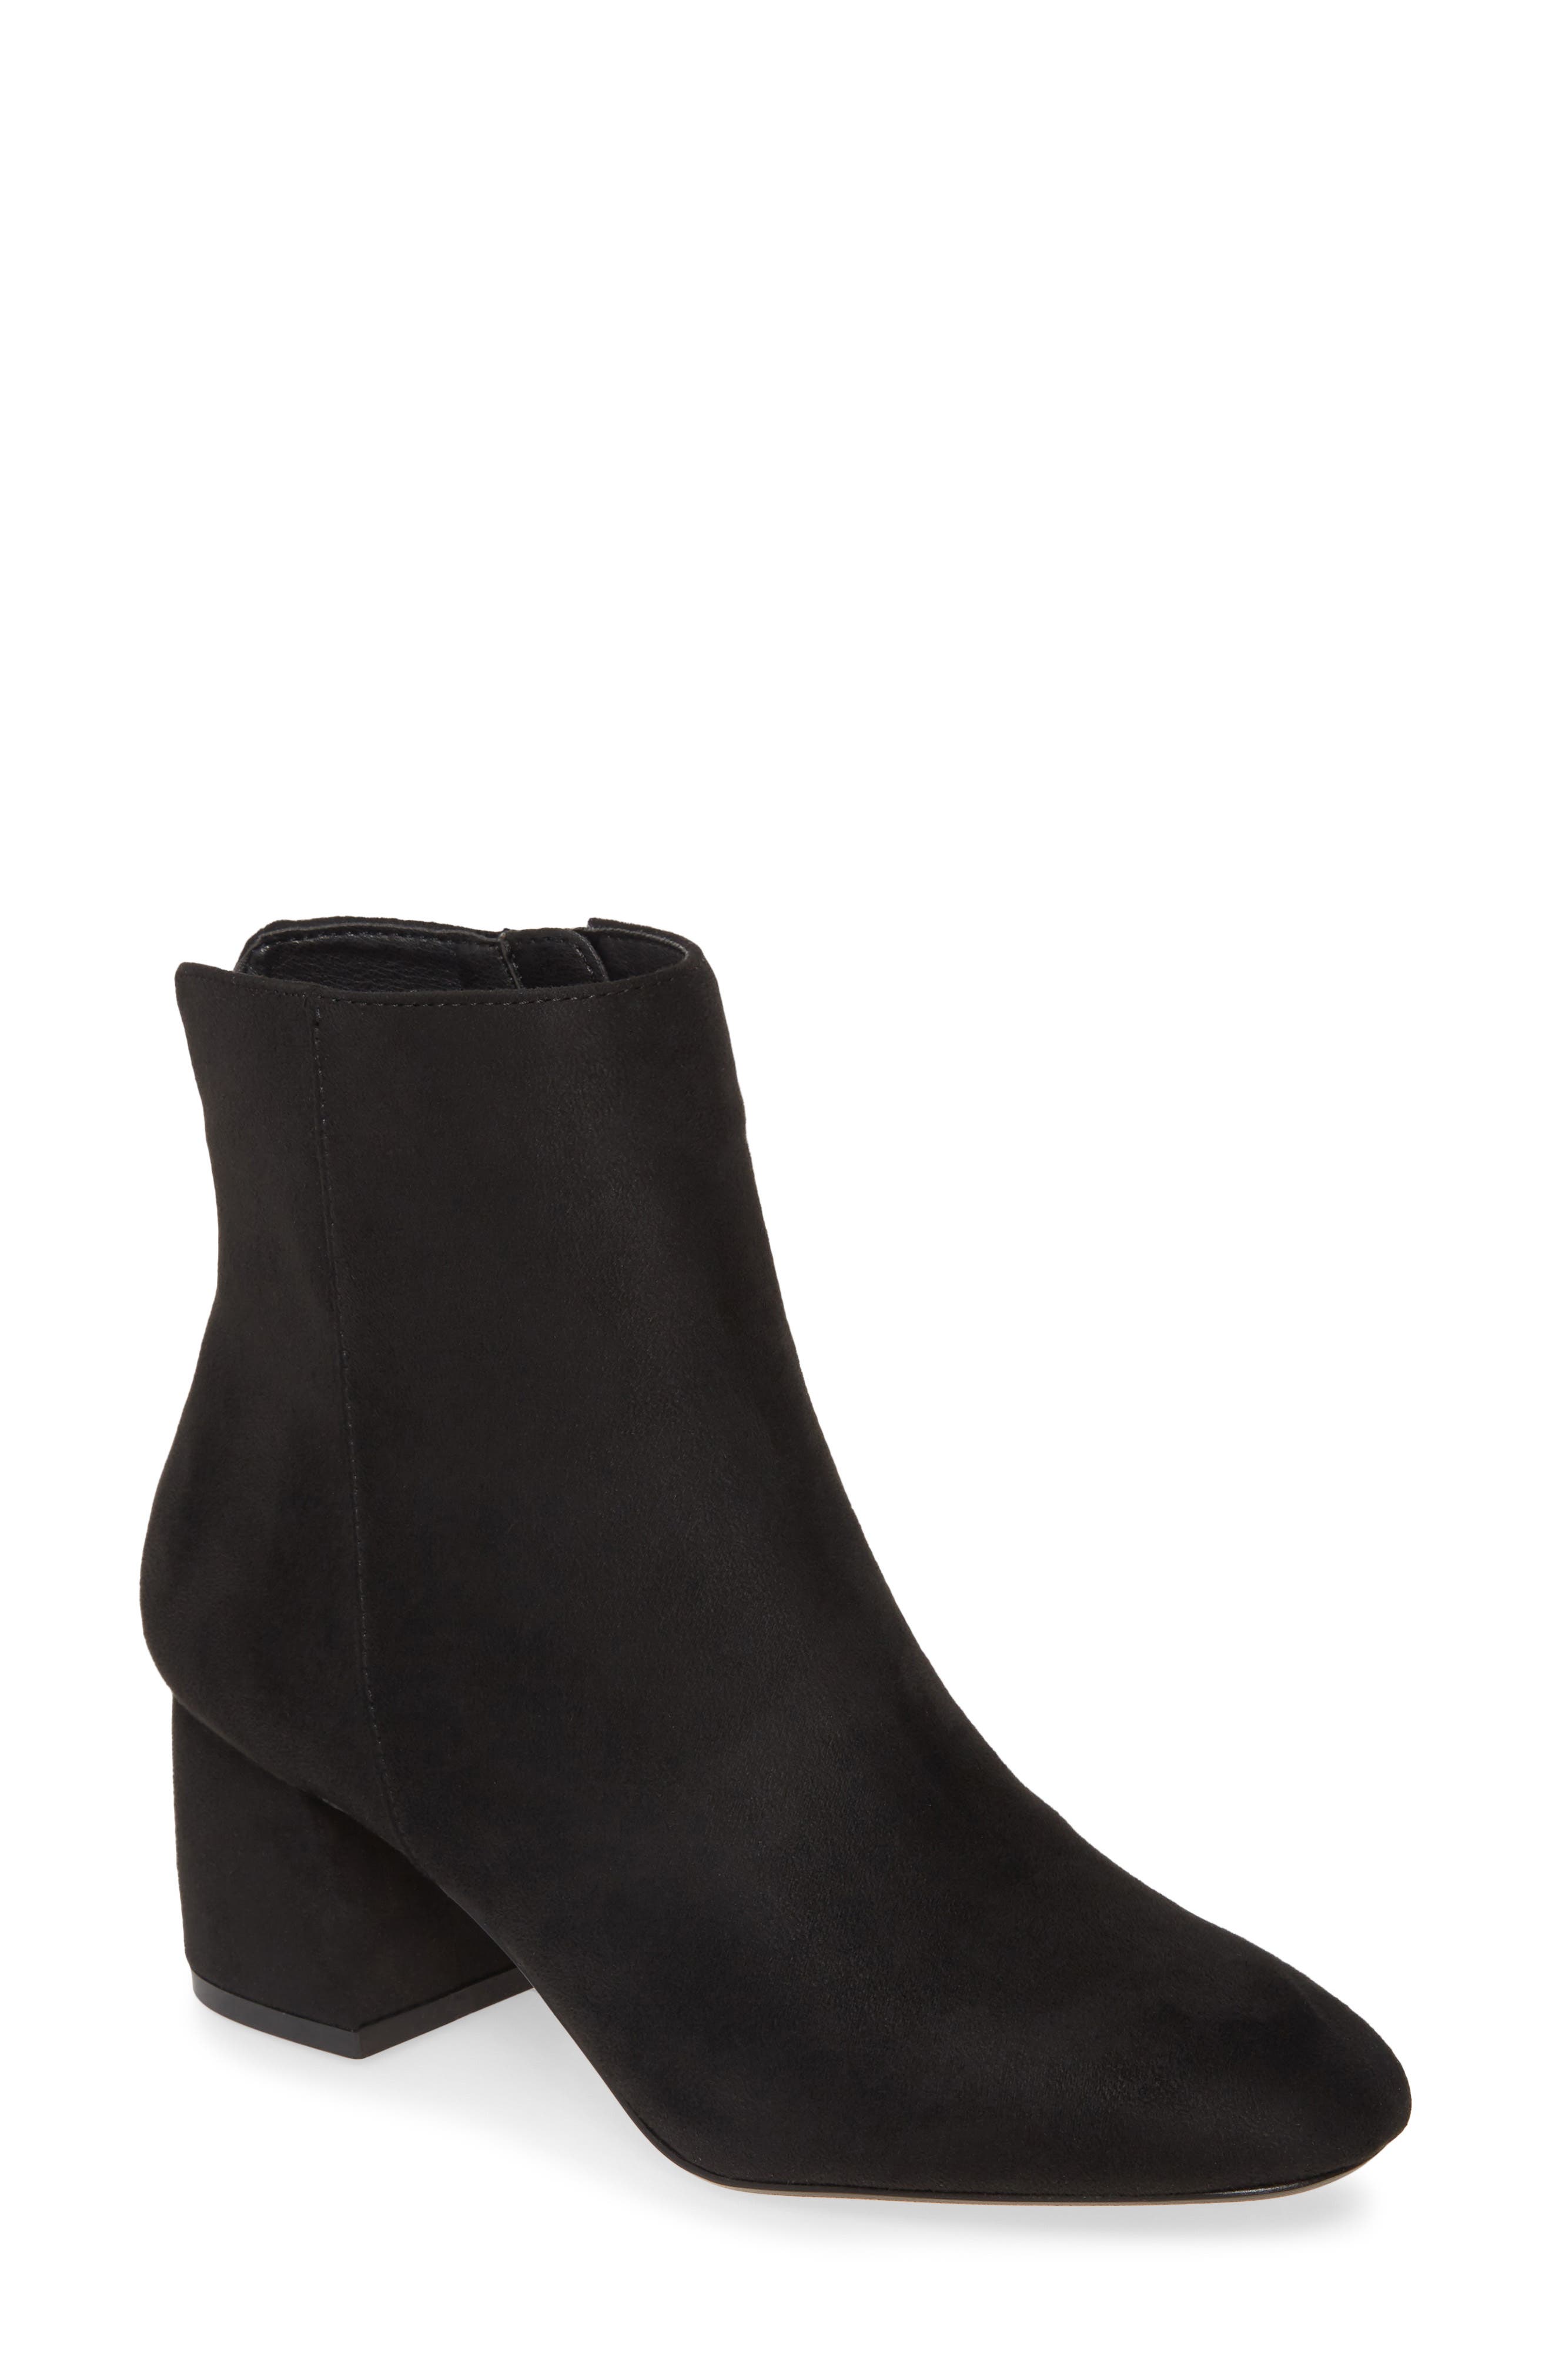 low black boots nordstrom